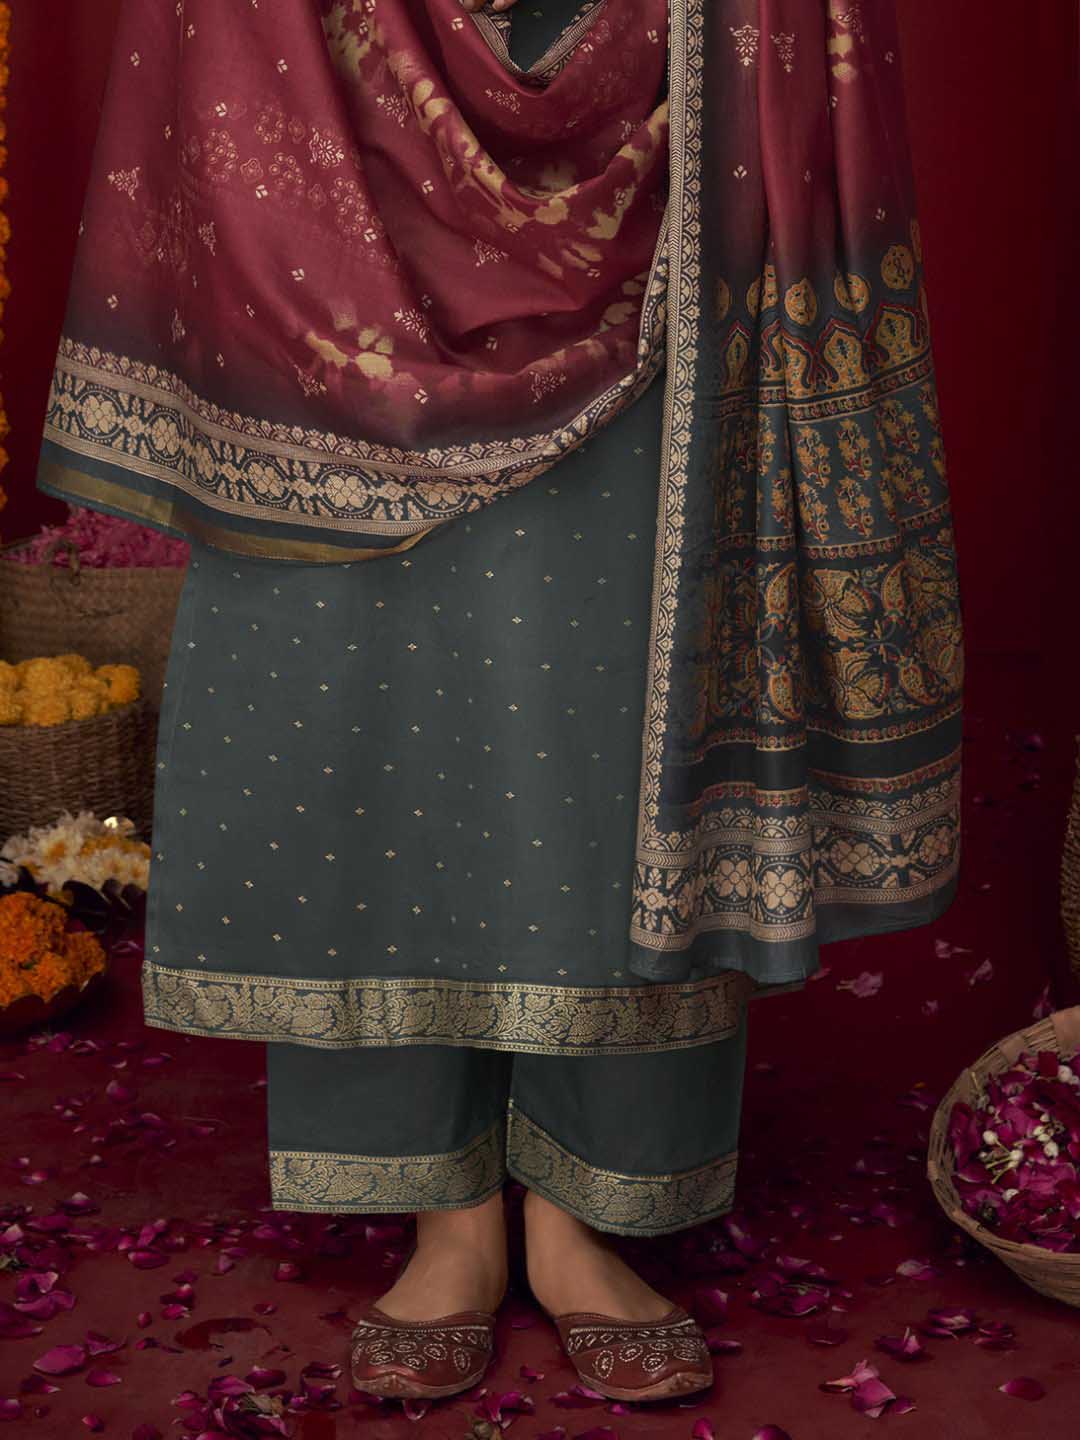 Unstitched Embroidered Cotton Satin Grey Salwar Suit Material